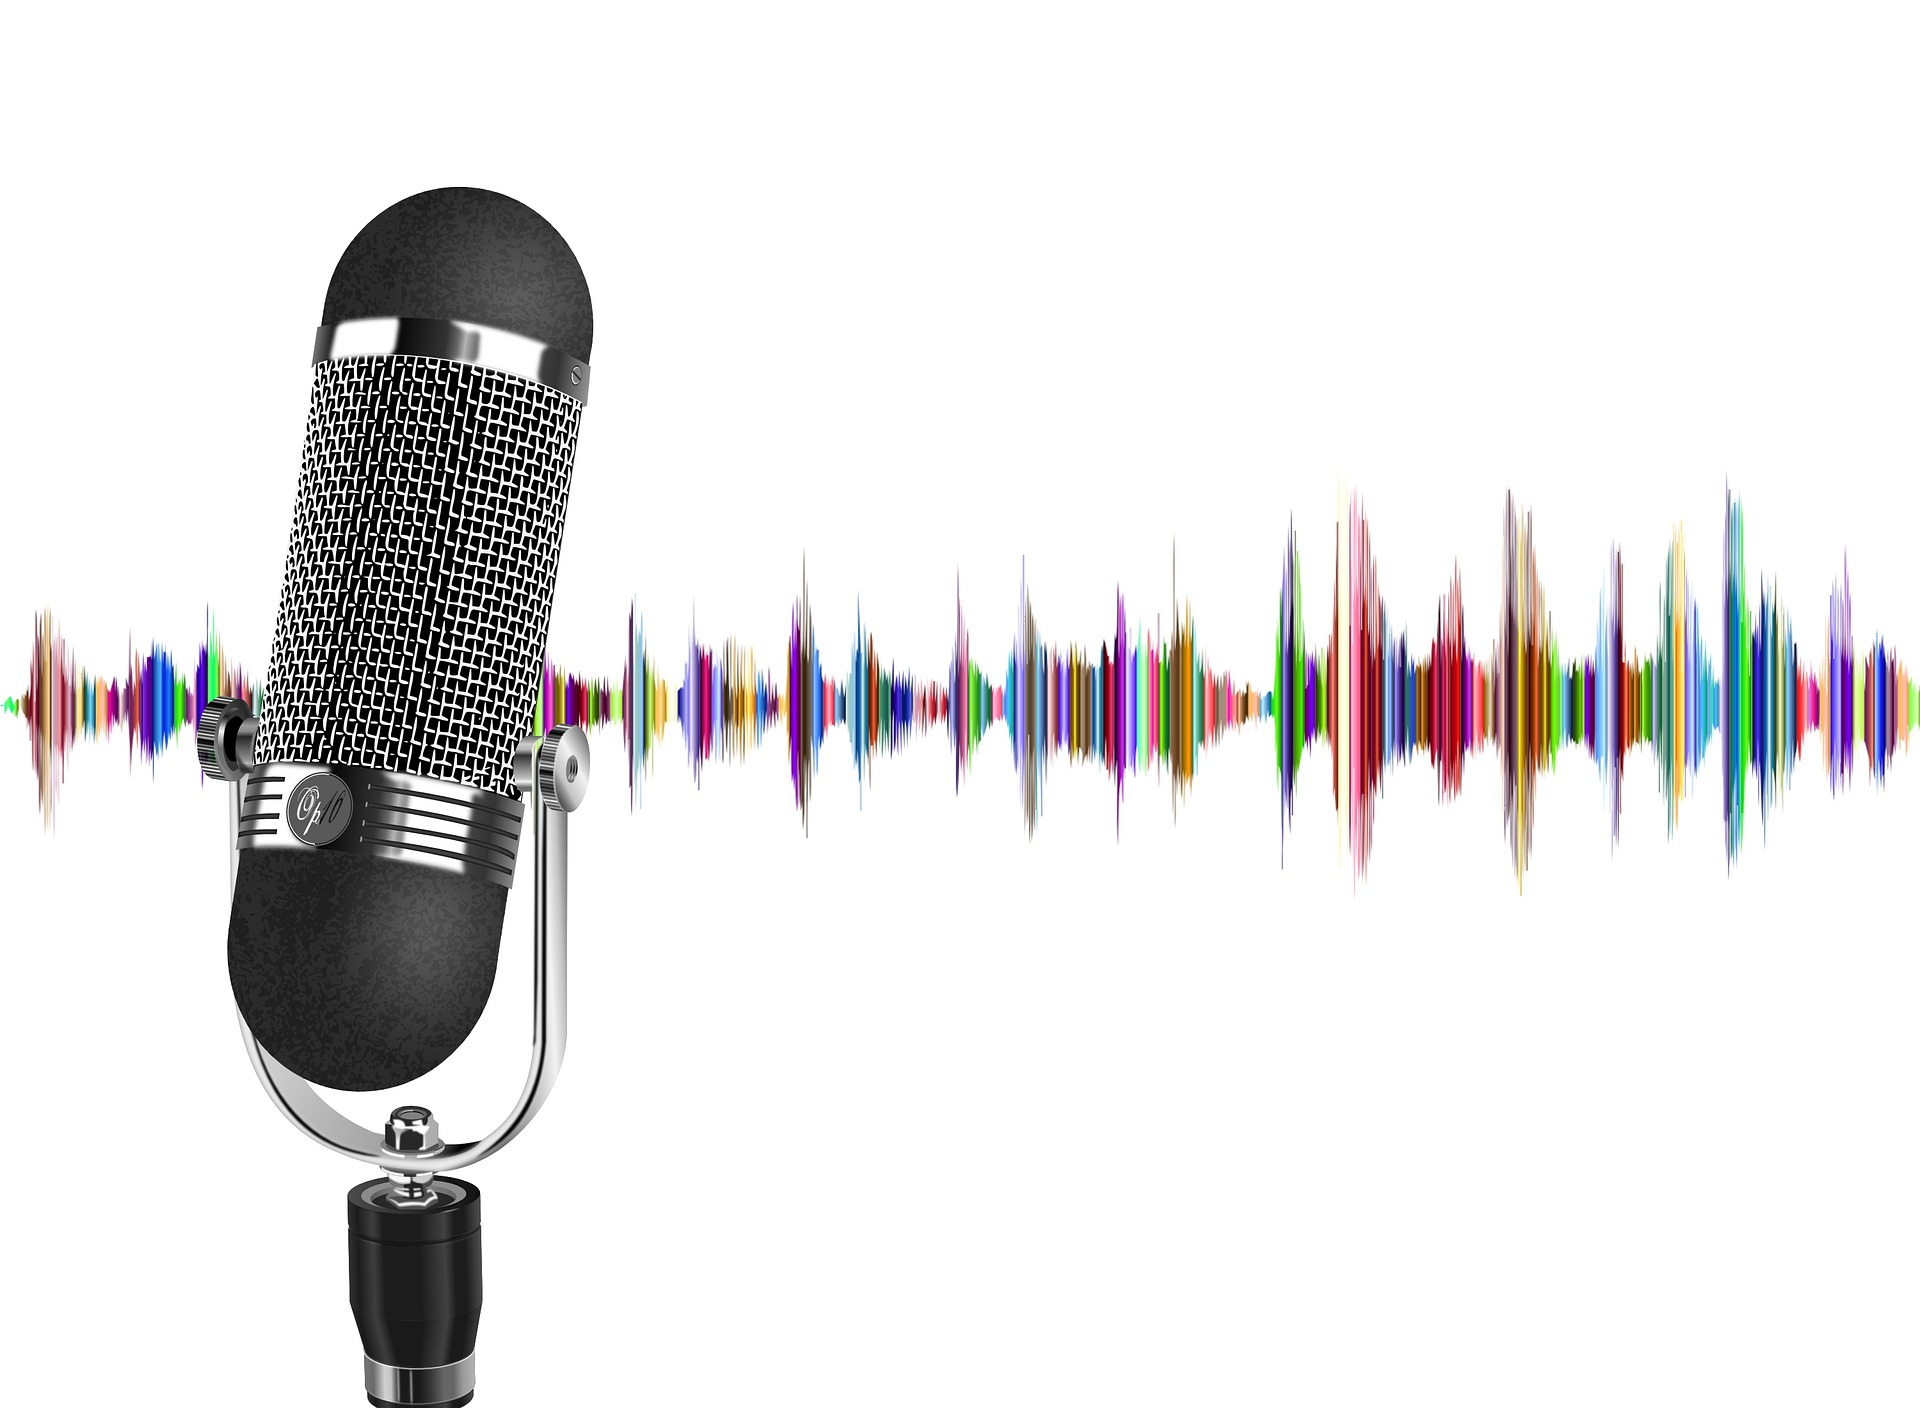 Audio recording Mic with audio file wave